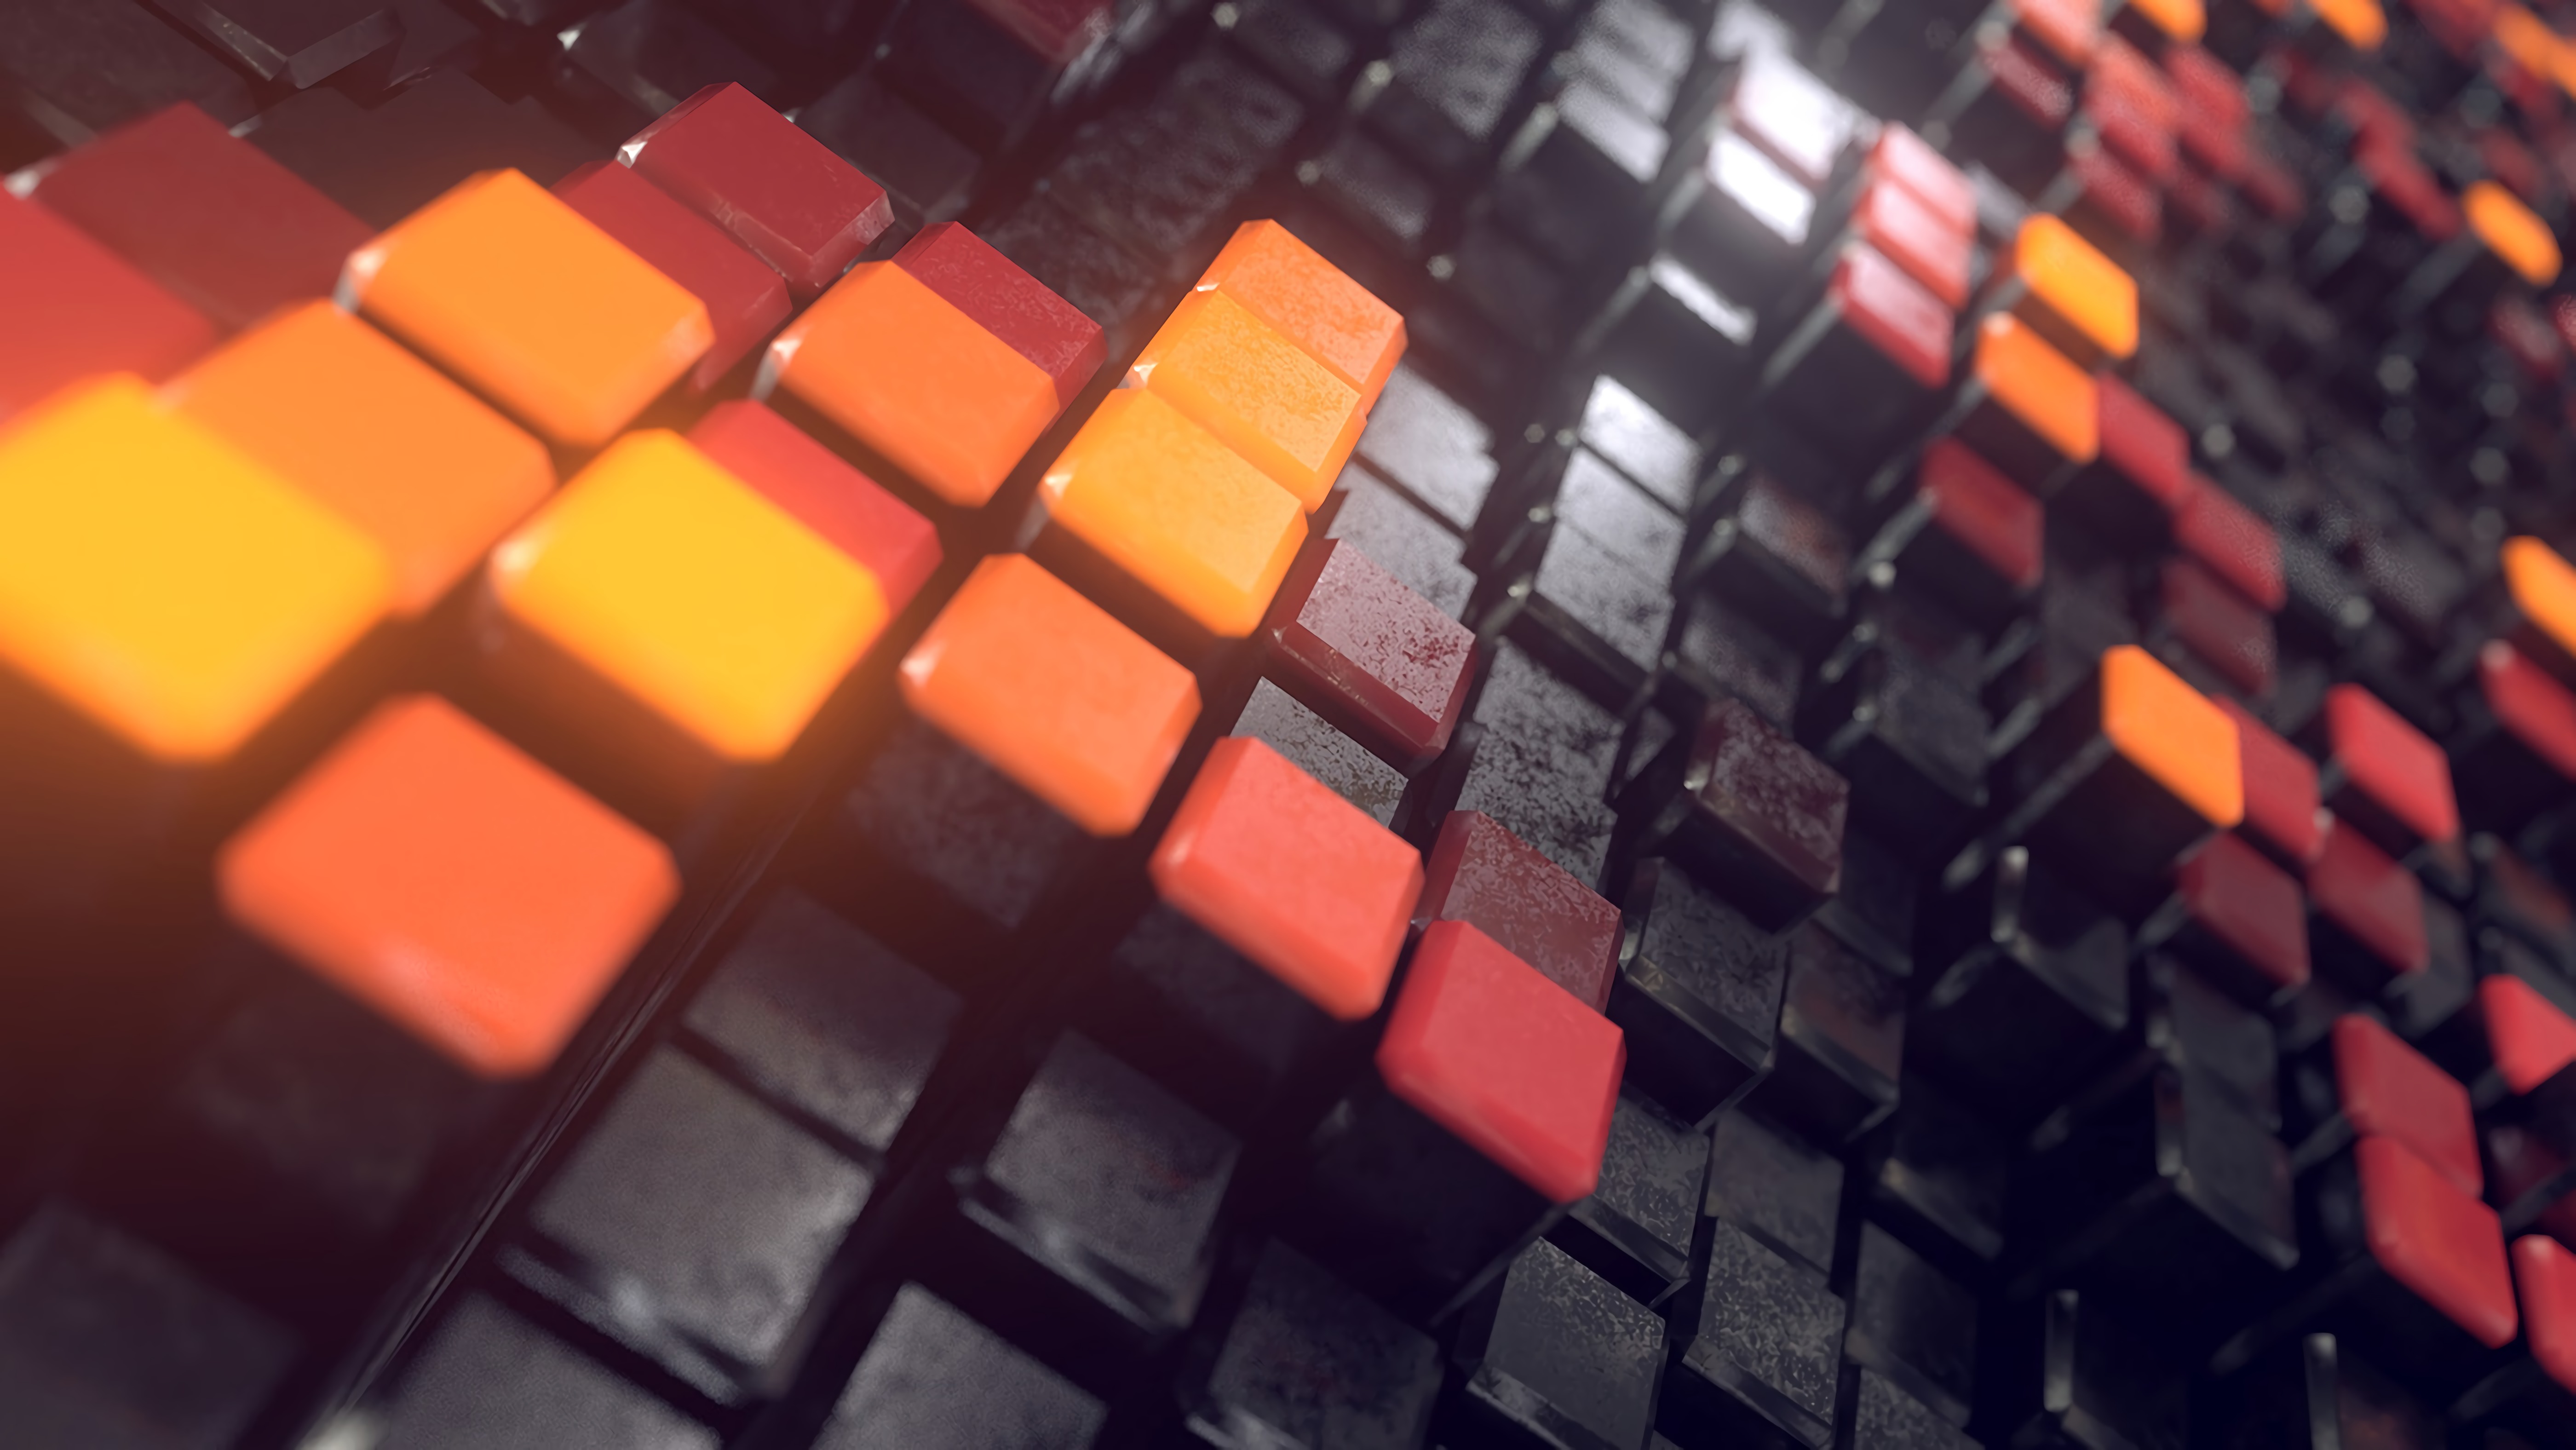 76145 download wallpaper 3d, shapes, shape, keys, squares, equipment, apparatus screensavers and pictures for free